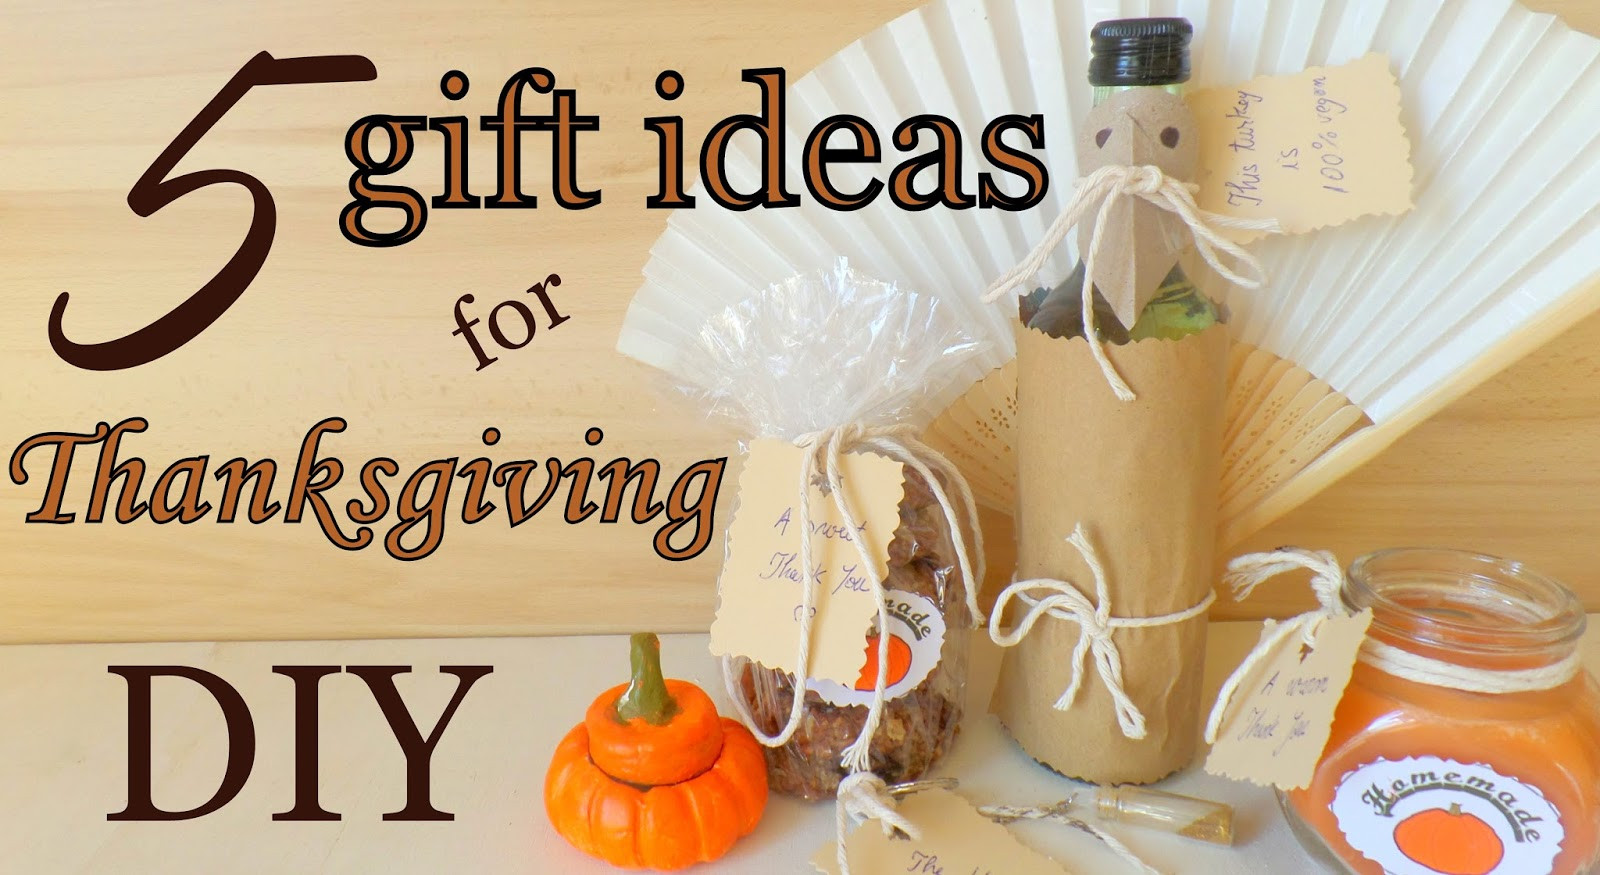 Thanksgiving Gift Ideas For Friends
 The Fluffy Hedgehog 5 t Ideas for Thanksgiving DIY